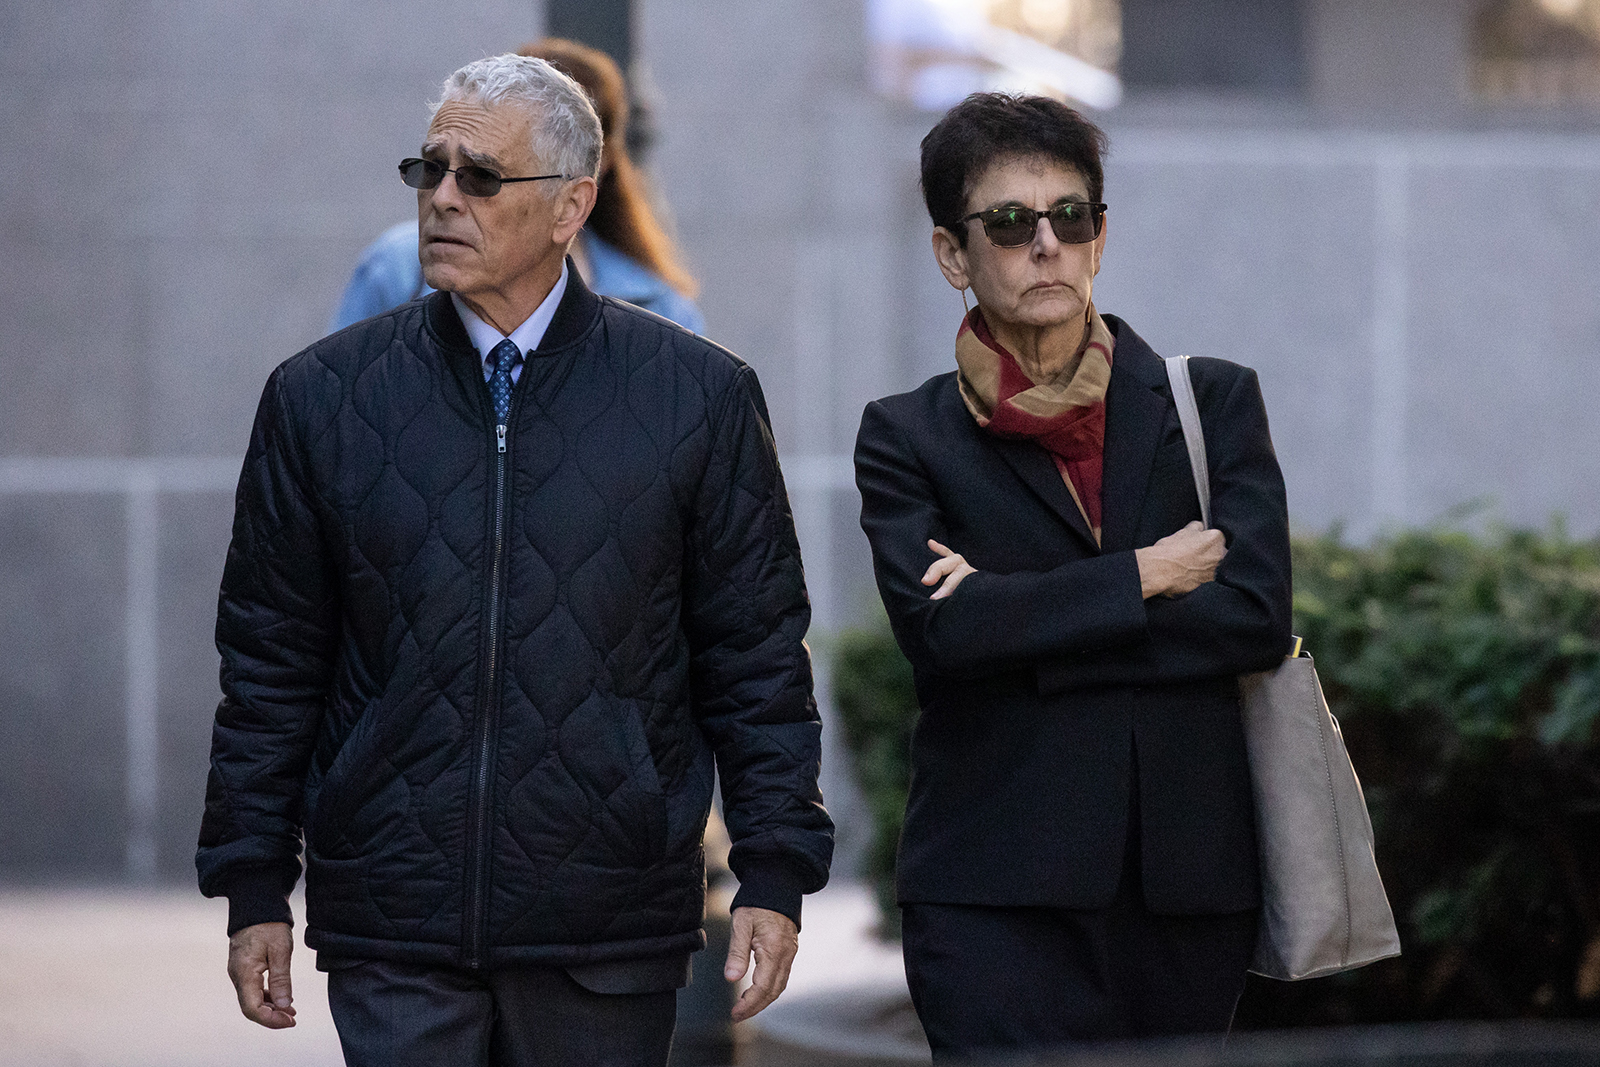 Barbara Fried and Allan Joseph Bankman, parents of FTX Co-Founder Sam Bankman-Fried, arrive at court in New York, US, on October 13.